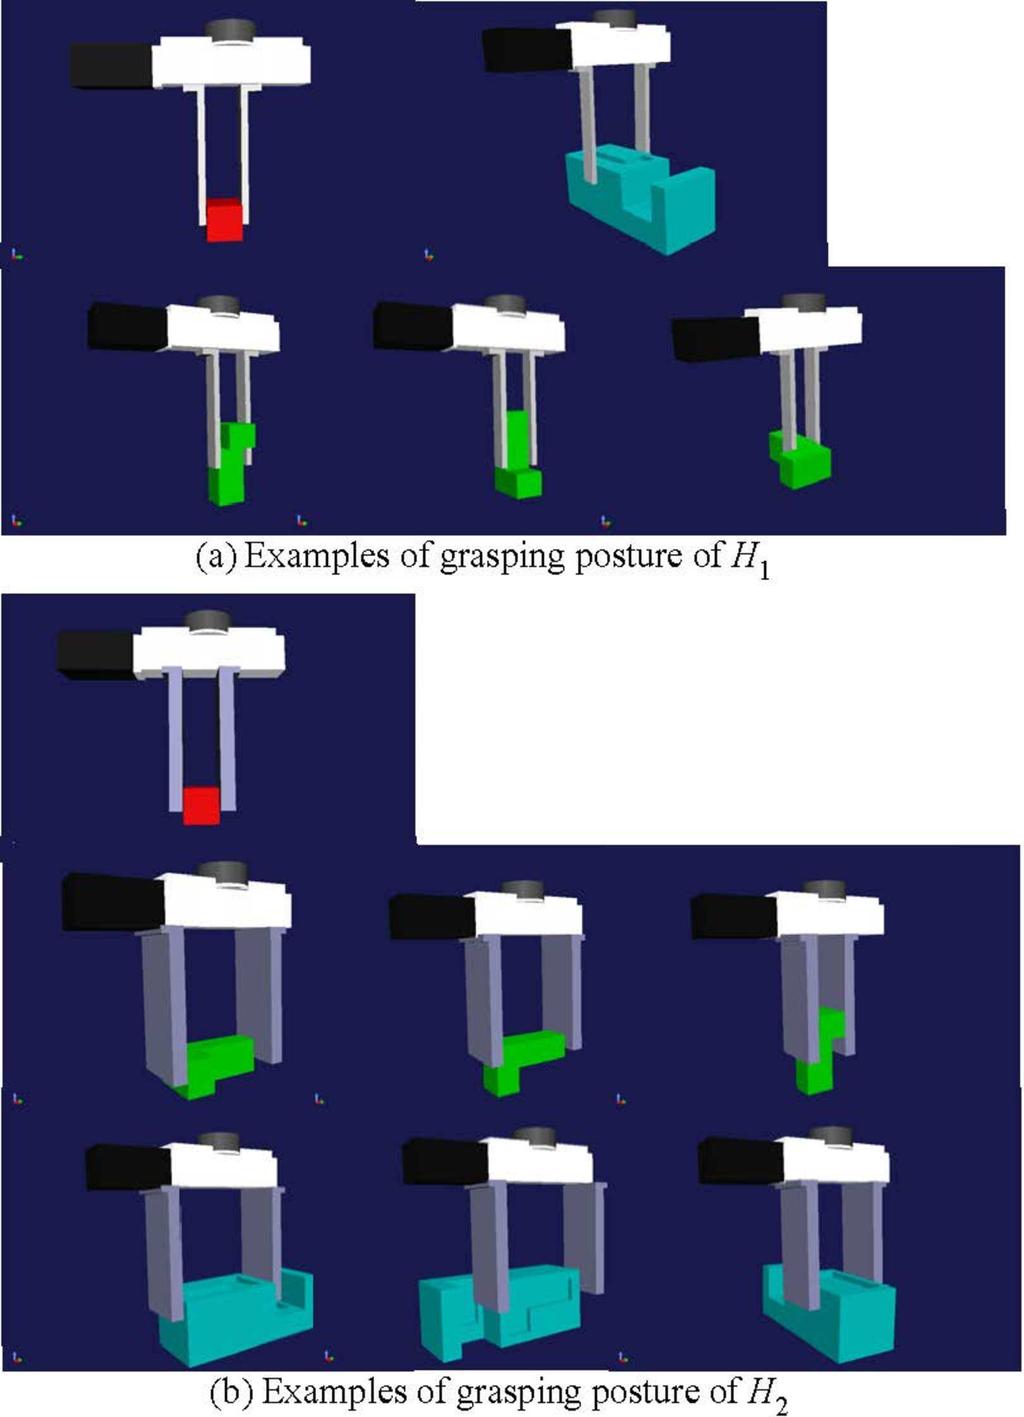 Chung, A Framework on Automatic Generation of Contact State Graph for Robotic Assembly, Advanced Robotics, vol. 25, No. 13-14, pp. 1603-1625, 2011. [4] R.H. Wilson and J.-C.